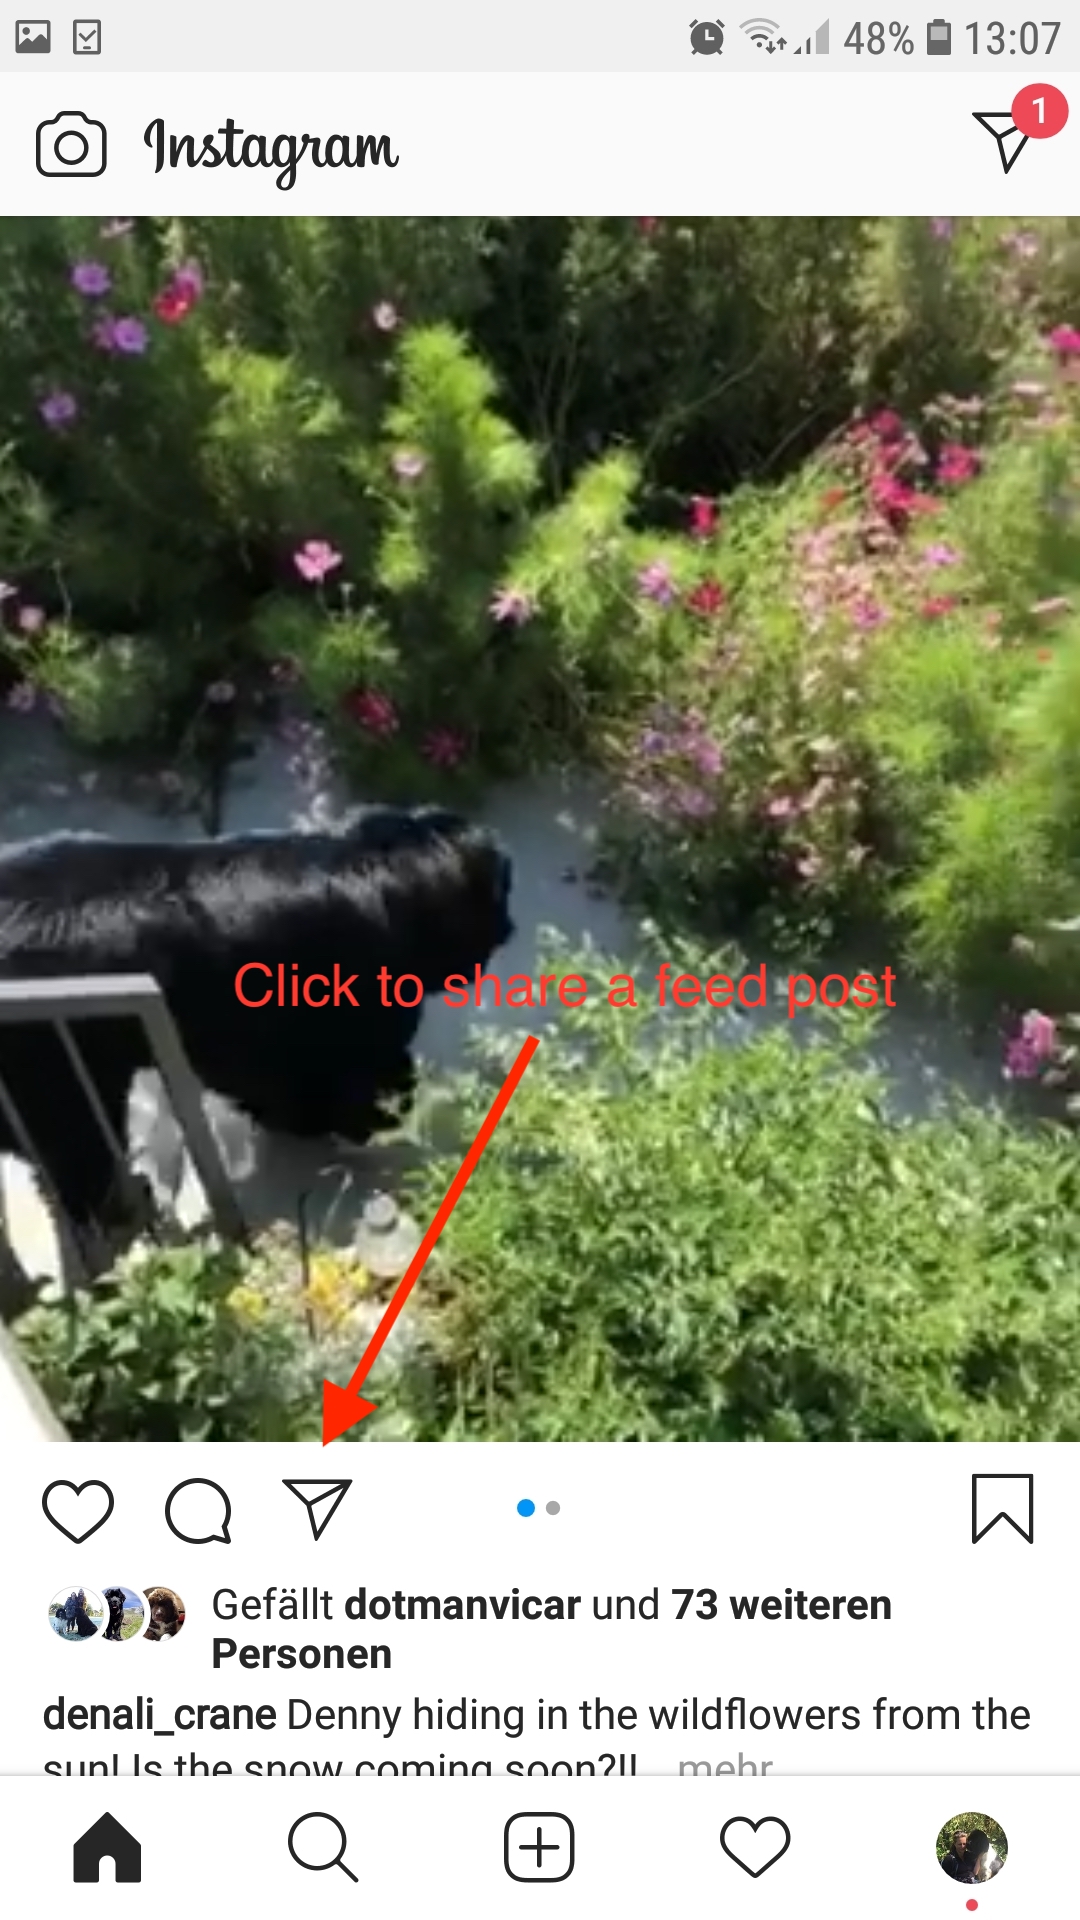 How to share a feed post to your Instagram Story